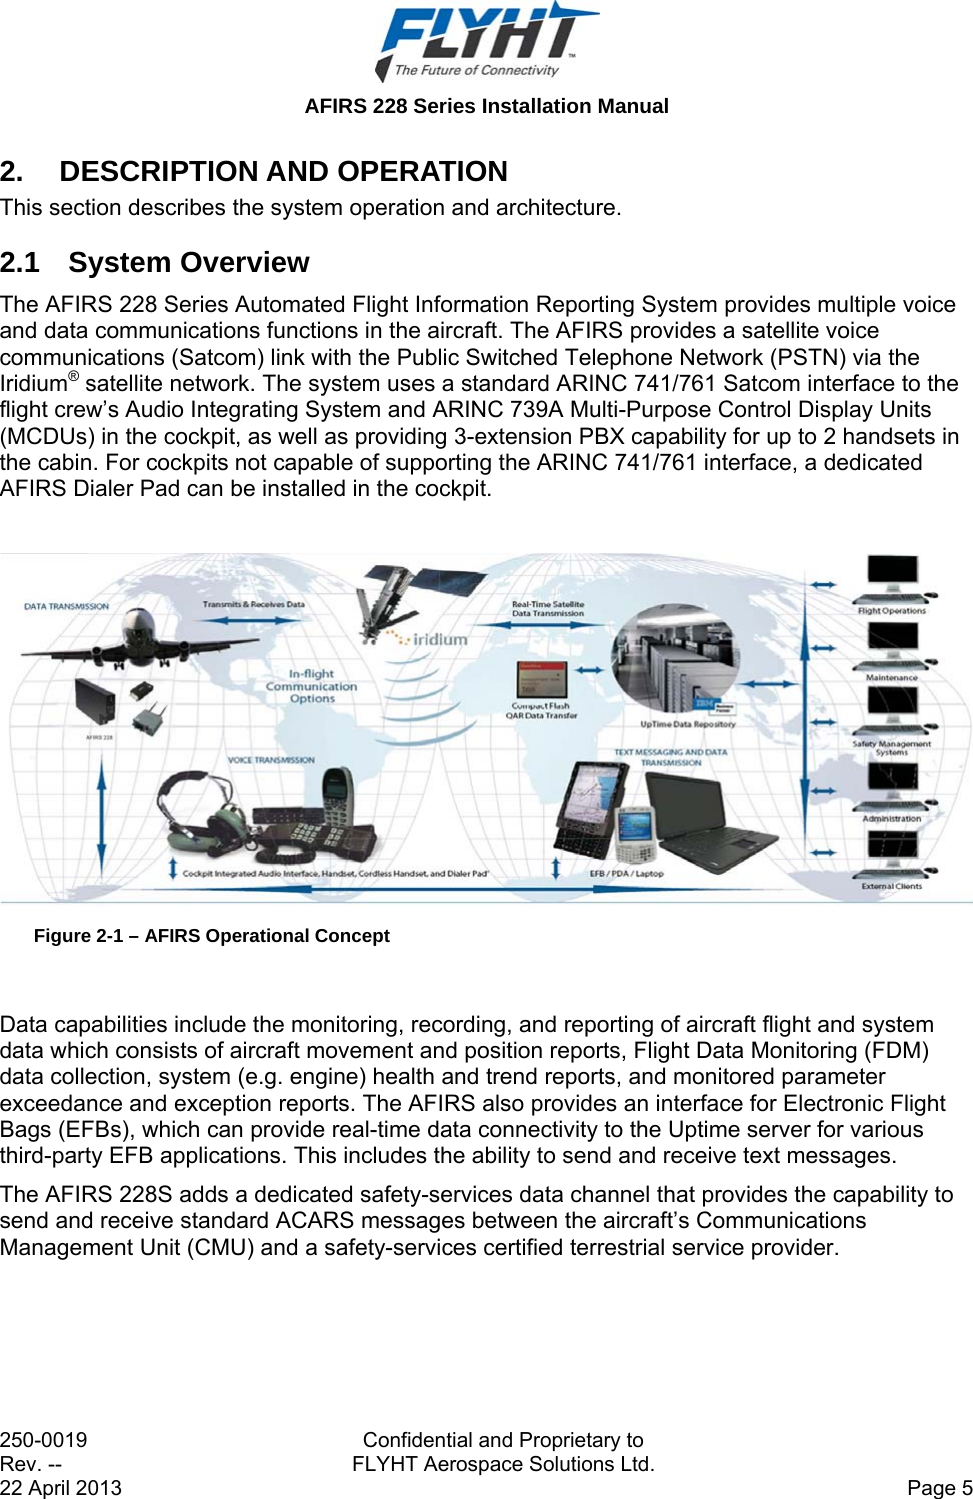  AFIRS 228 Series Installation Manual 250-0019  Confidential and Proprietary to Rev. --  FLYHT Aerospace Solutions Ltd. 22 April 2013    Page 5 2. DESCRIPTION AND OPERATION This section describes the system operation and architecture. 2.1 System Overview The AFIRS 228 Series Automated Flight Information Reporting System provides multiple voice and data communications functions in the aircraft. The AFIRS provides a satellite voice communications (Satcom) link with the Public Switched Telephone Network (PSTN) via the Iridium® satellite network. The system uses a standard ARINC 741/761 Satcom interface to the flight crew’s Audio Integrating System and ARINC 739A Multi-Purpose Control Display Units (MCDUs) in the cockpit, as well as providing 3-extension PBX capability for up to 2 handsets in the cabin. For cockpits not capable of supporting the ARINC 741/761 interface, a dedicated AFIRS Dialer Pad can be installed in the cockpit.   Figure 2-1 – AFIRS Operational Concept  Data capabilities include the monitoring, recording, and reporting of aircraft flight and system data which consists of aircraft movement and position reports, Flight Data Monitoring (FDM) data collection, system (e.g. engine) health and trend reports, and monitored parameter exceedance and exception reports. The AFIRS also provides an interface for Electronic Flight Bags (EFBs), which can provide real-time data connectivity to the Uptime server for various third-party EFB applications. This includes the ability to send and receive text messages. The AFIRS 228S adds a dedicated safety-services data channel that provides the capability to send and receive standard ACARS messages between the aircraft’s Communications Management Unit (CMU) and a safety-services certified terrestrial service provider. 